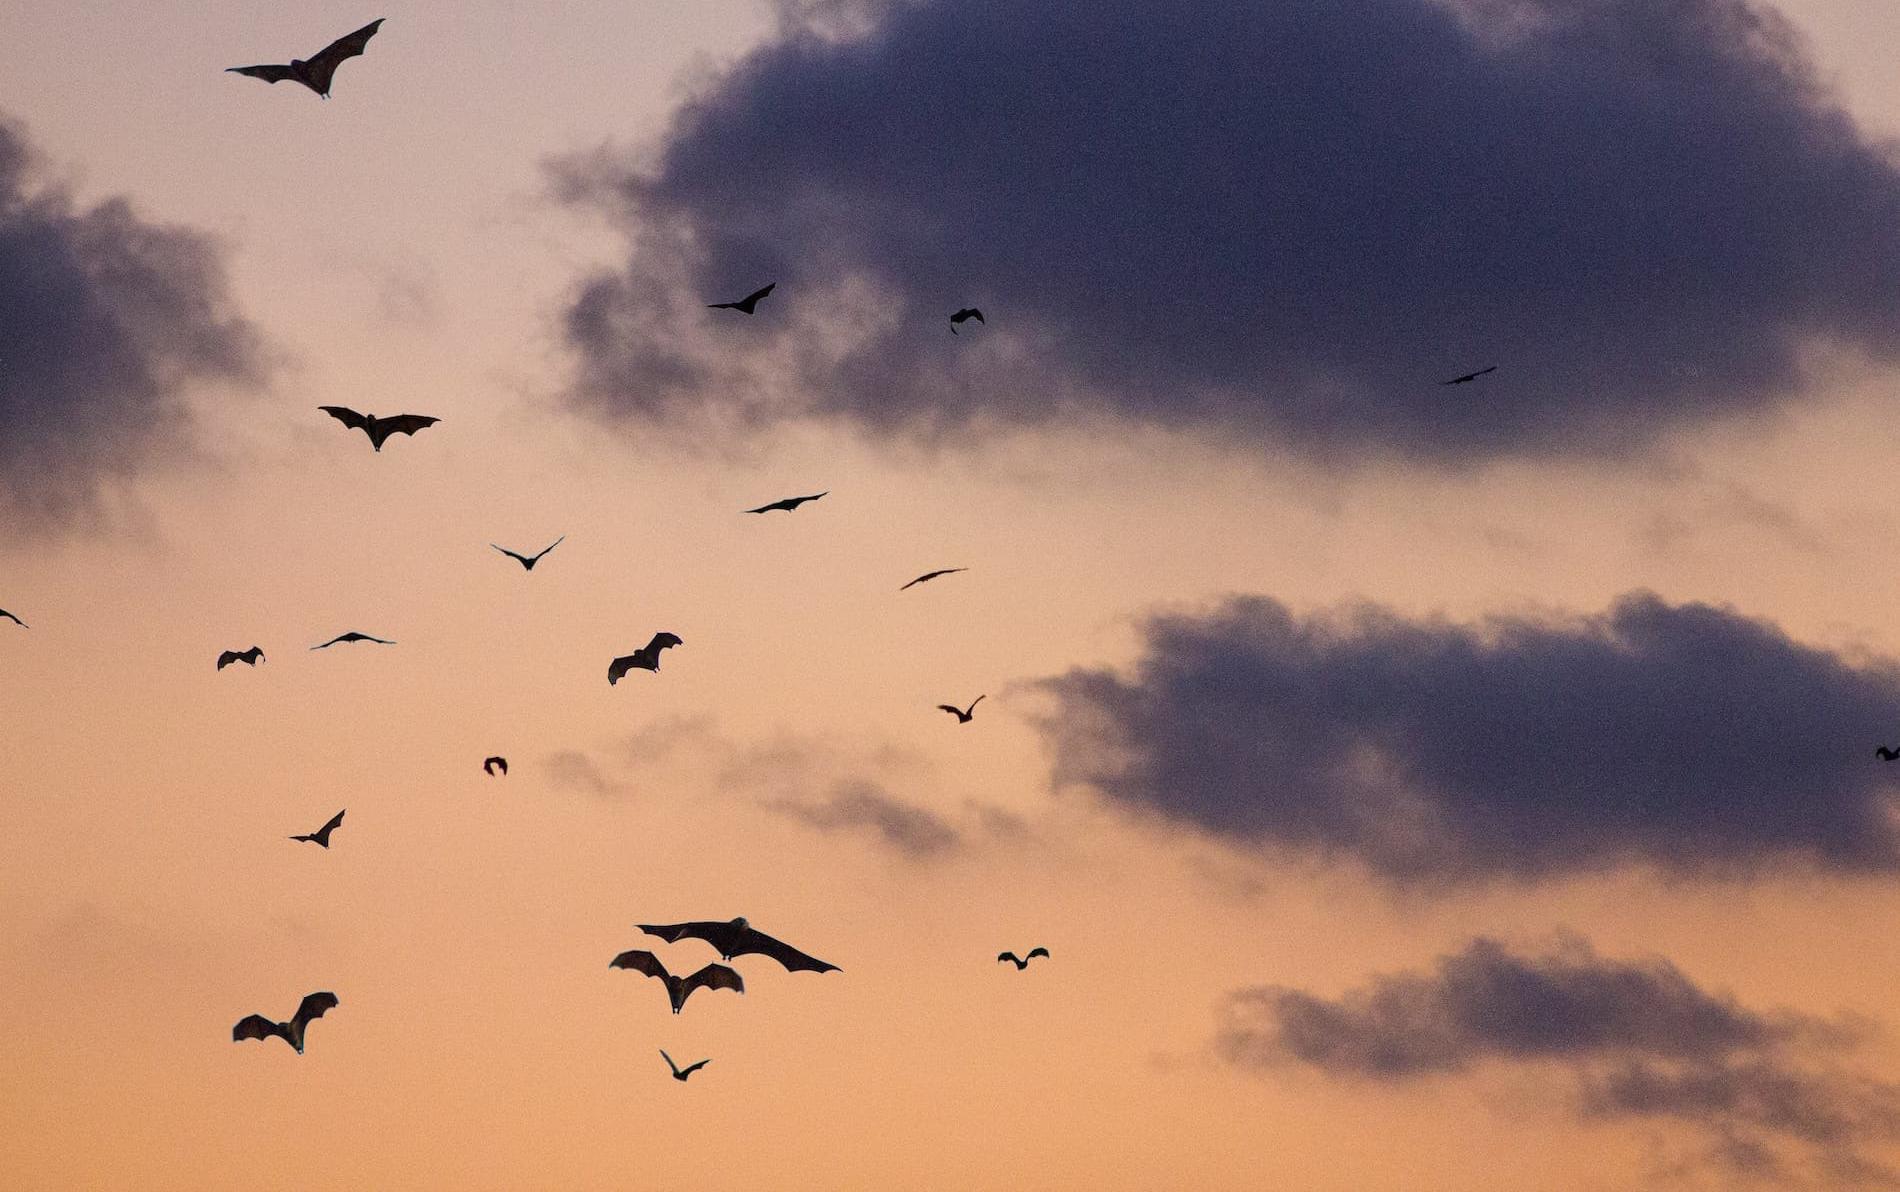 A colony of bats flying at dusk